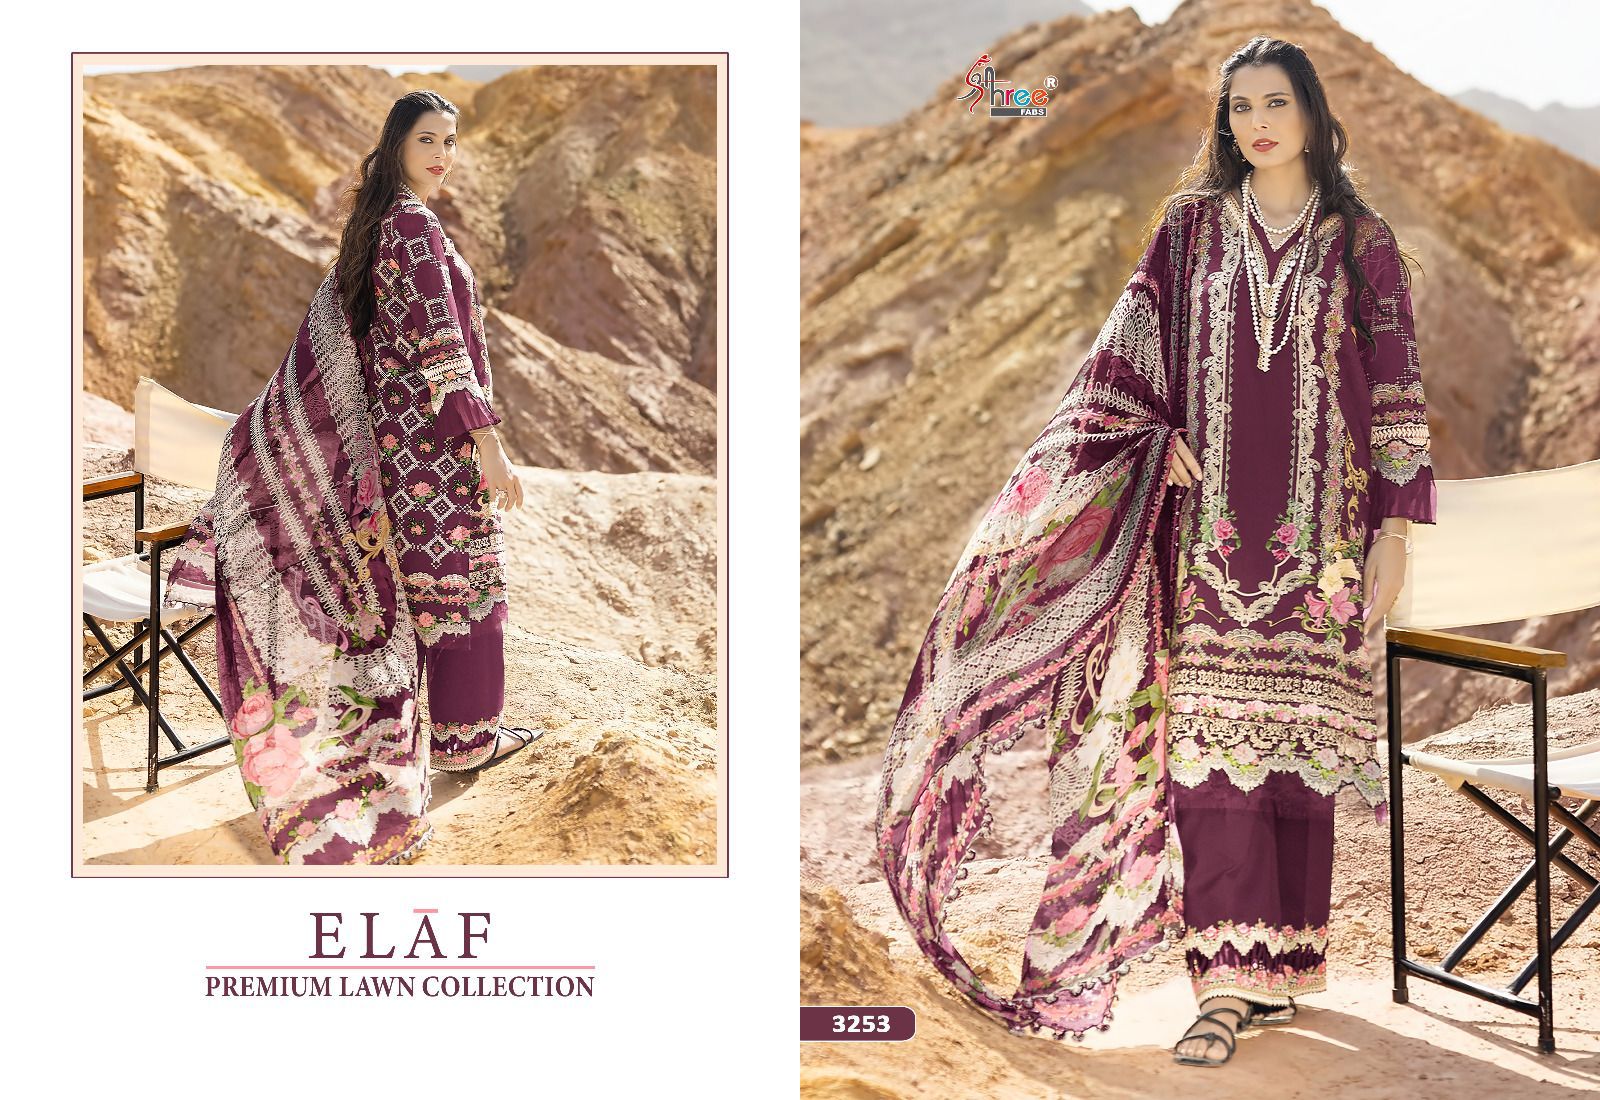 Shree Elaf Premium Lawn Collection collection 2